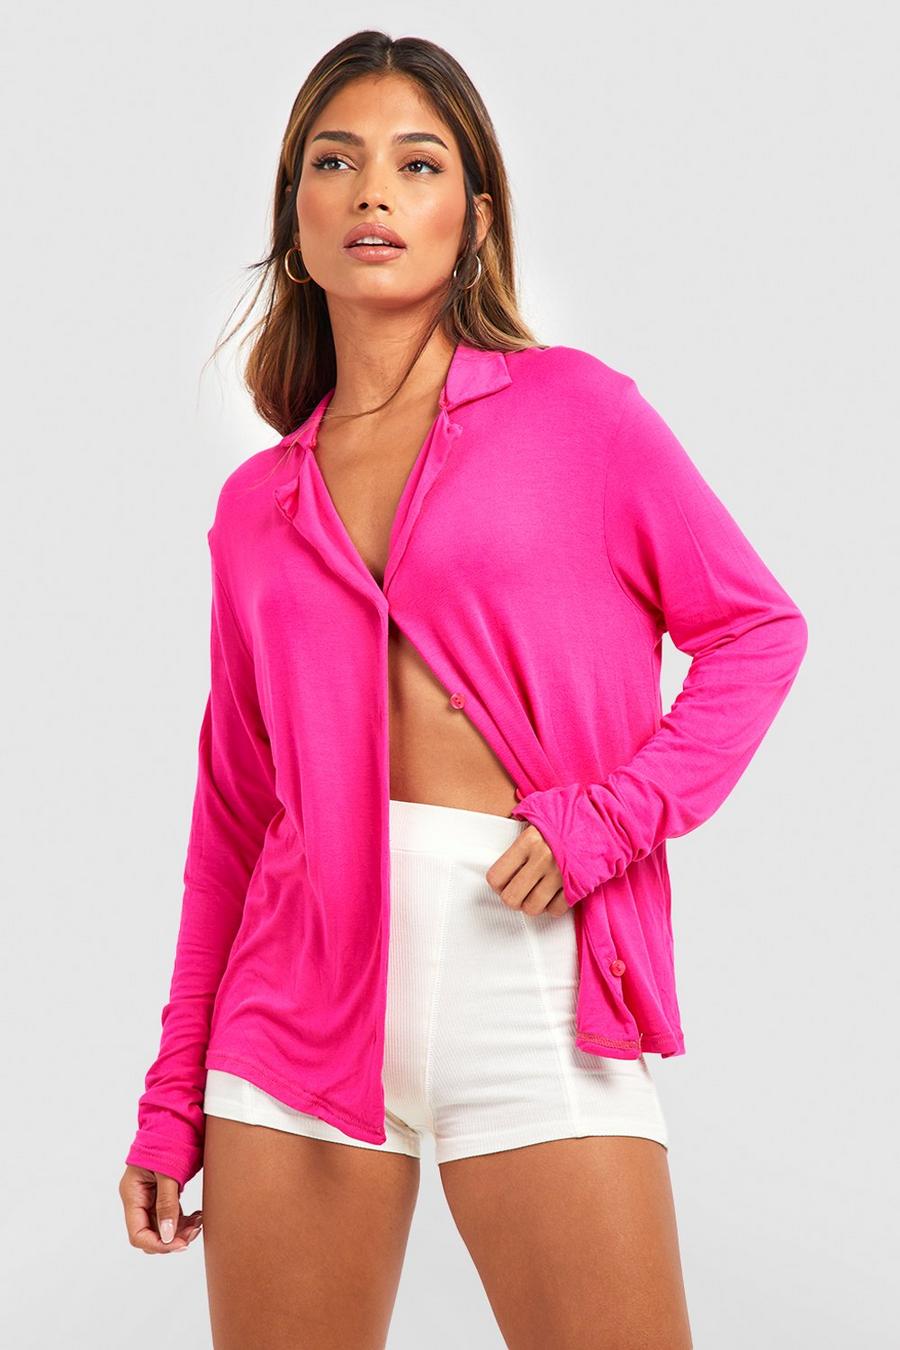 Hot pink ONLY Pullover 'LEO' rosa pastello bianco nero rosso ruggine image number 1